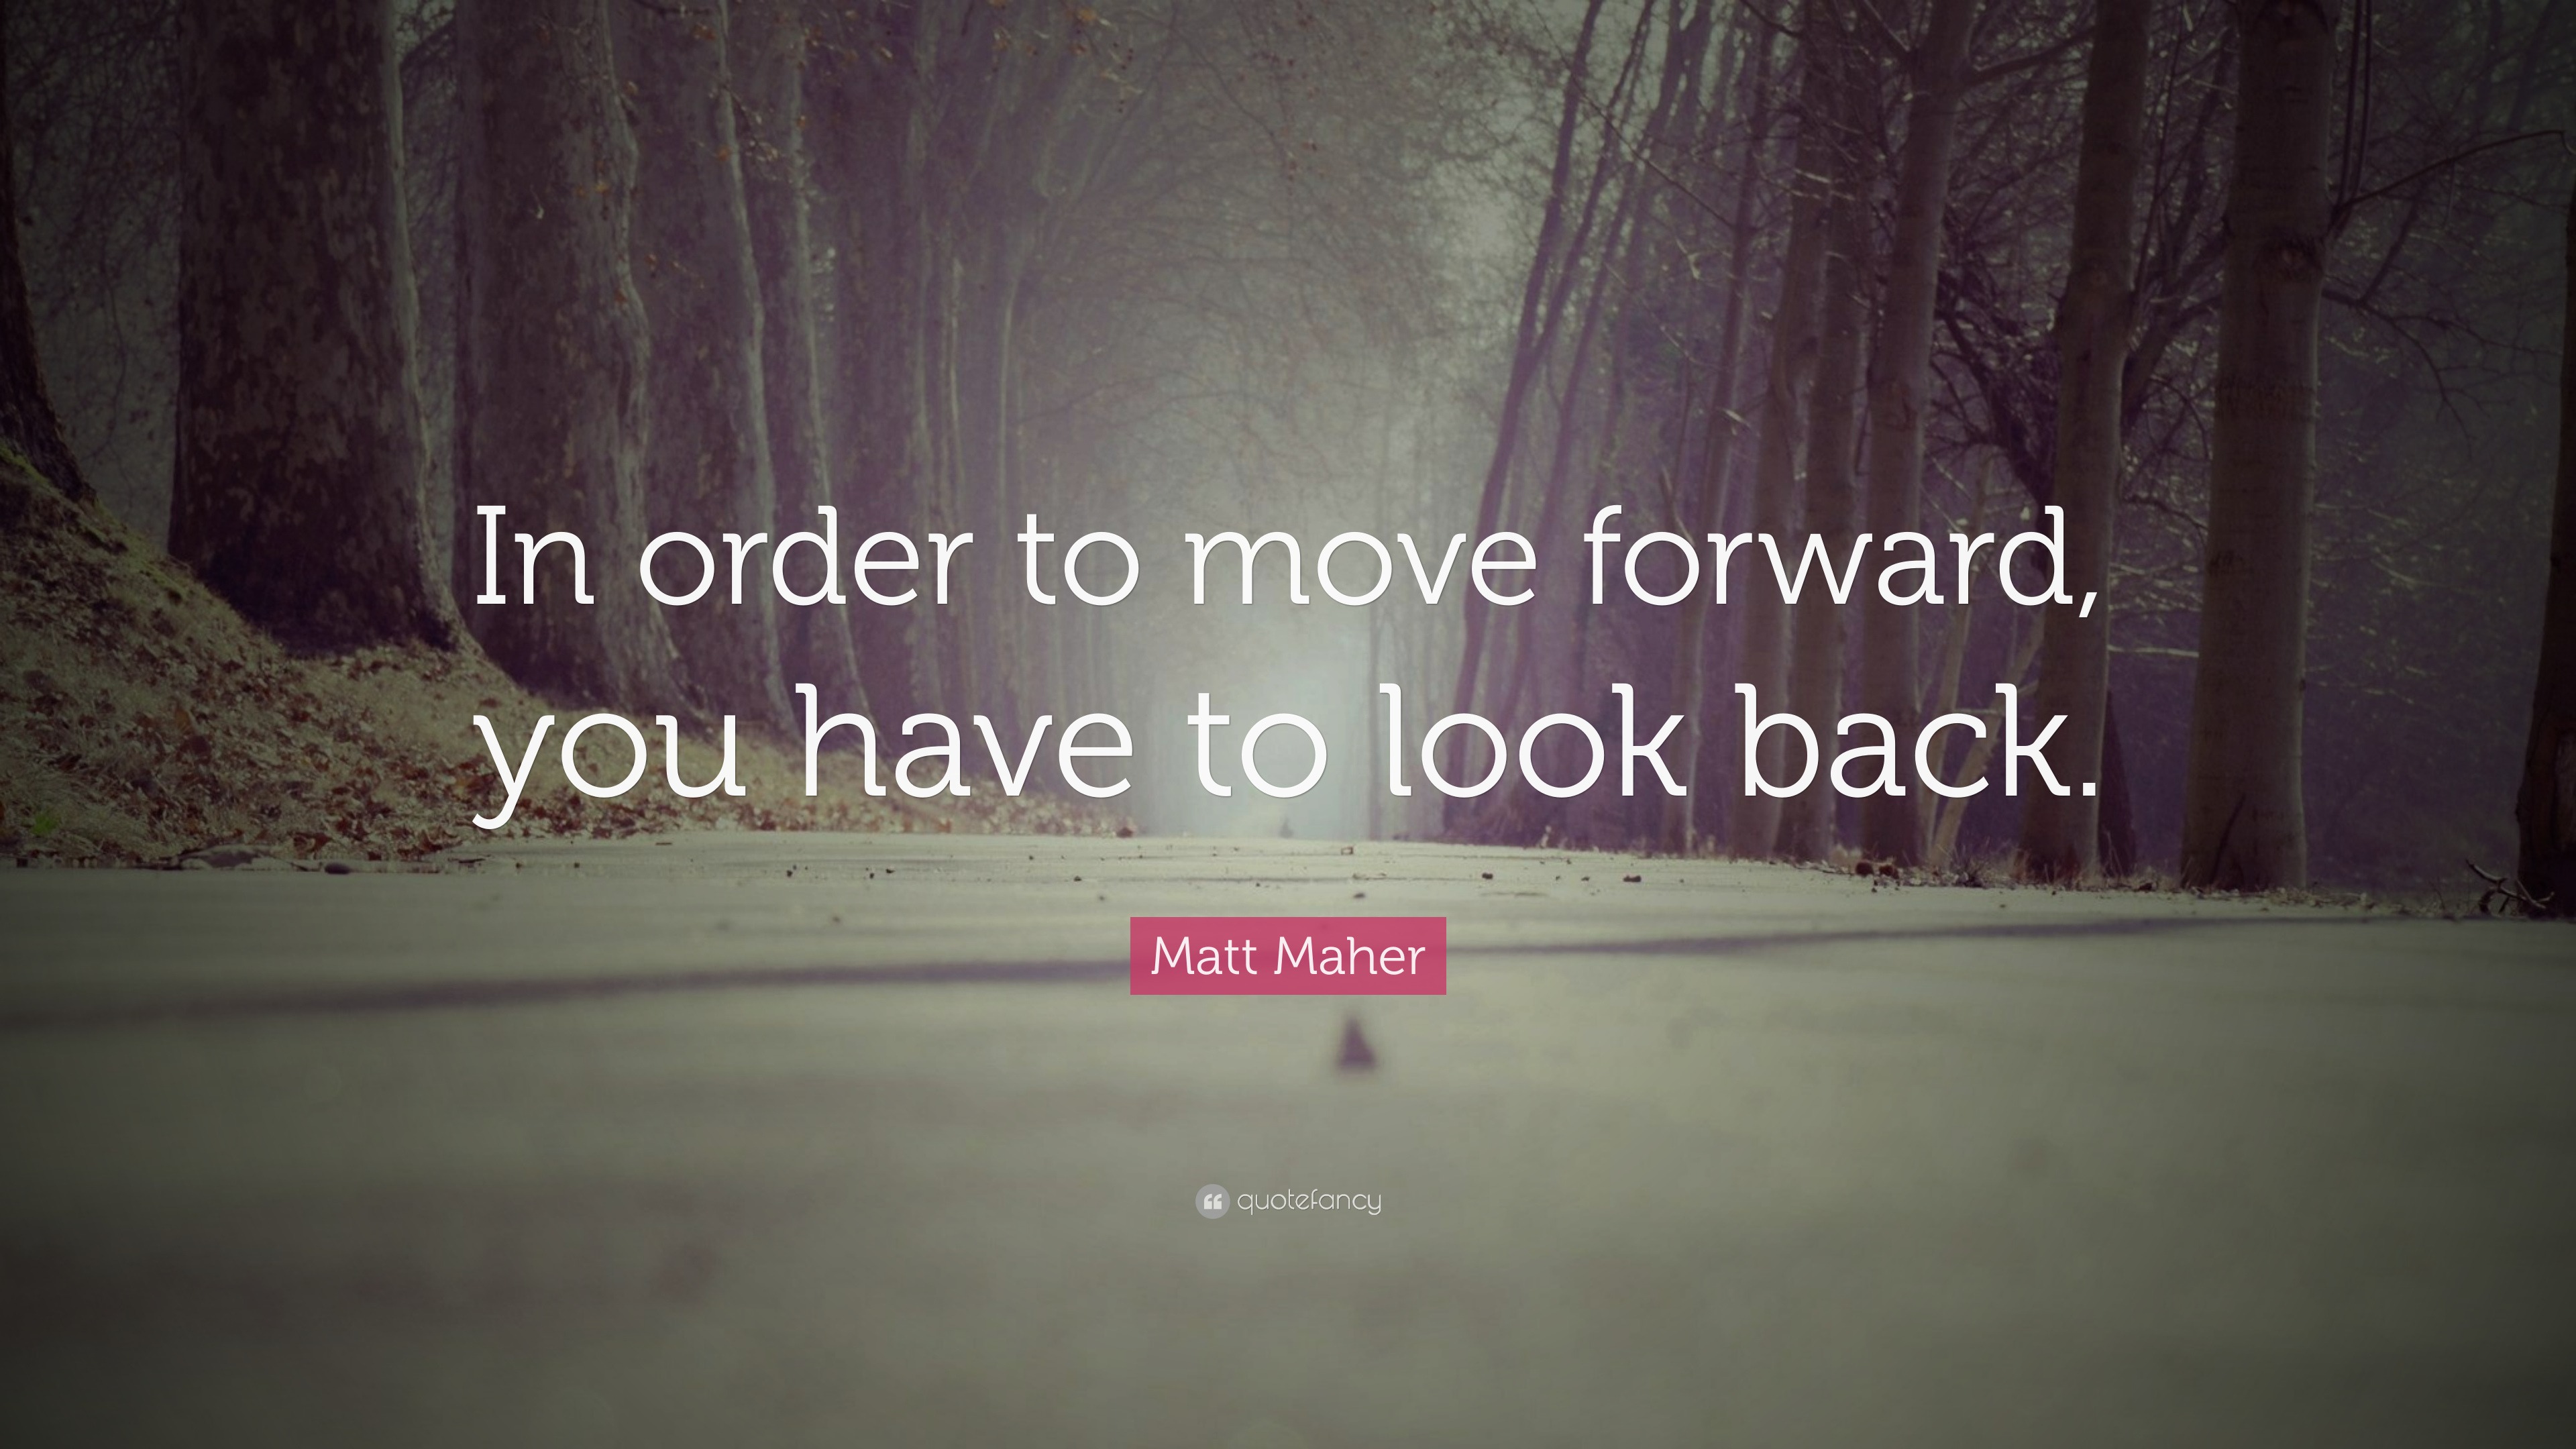 Matt Maher Quote: “In Order To Move Forward, You Have To Look Back.”